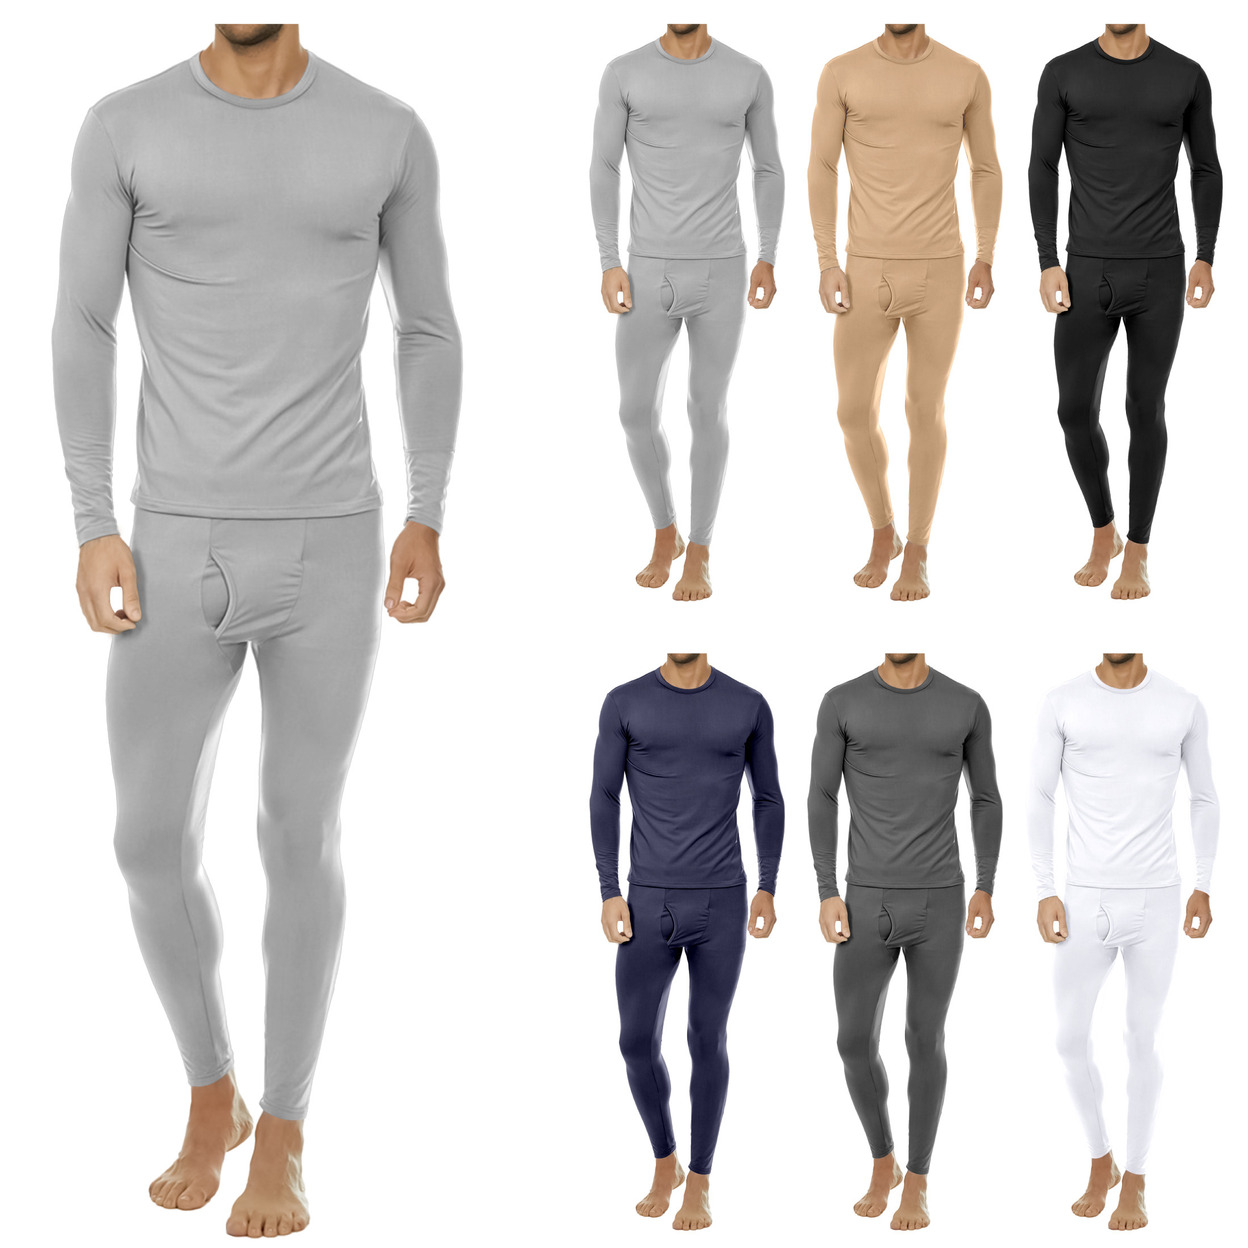 2-Sets: Men's Winter Warm Fleece Lined Thermal Underwear Set For Cold Weather - White&white, Small